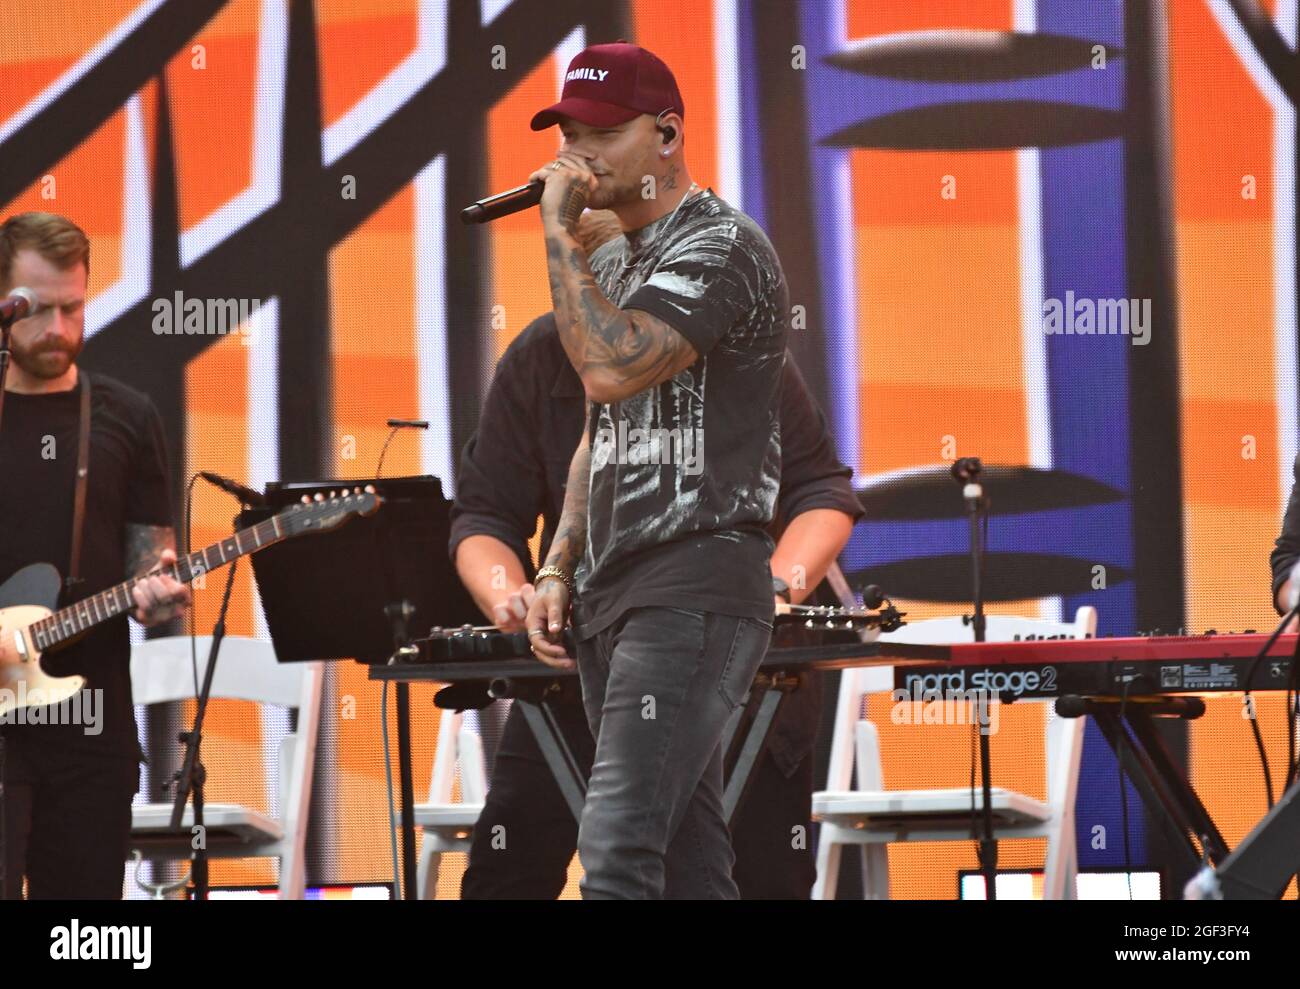 NEW YORK, NEW YORK - AUGUST 21: Kane Brown performs onstage during We Love NYC: The Homecoming Concert Produced by NYC, Clive Davis, and Live Nation on August 21, 2021 in New York City. (Photo by John Atashian) Stock Photo